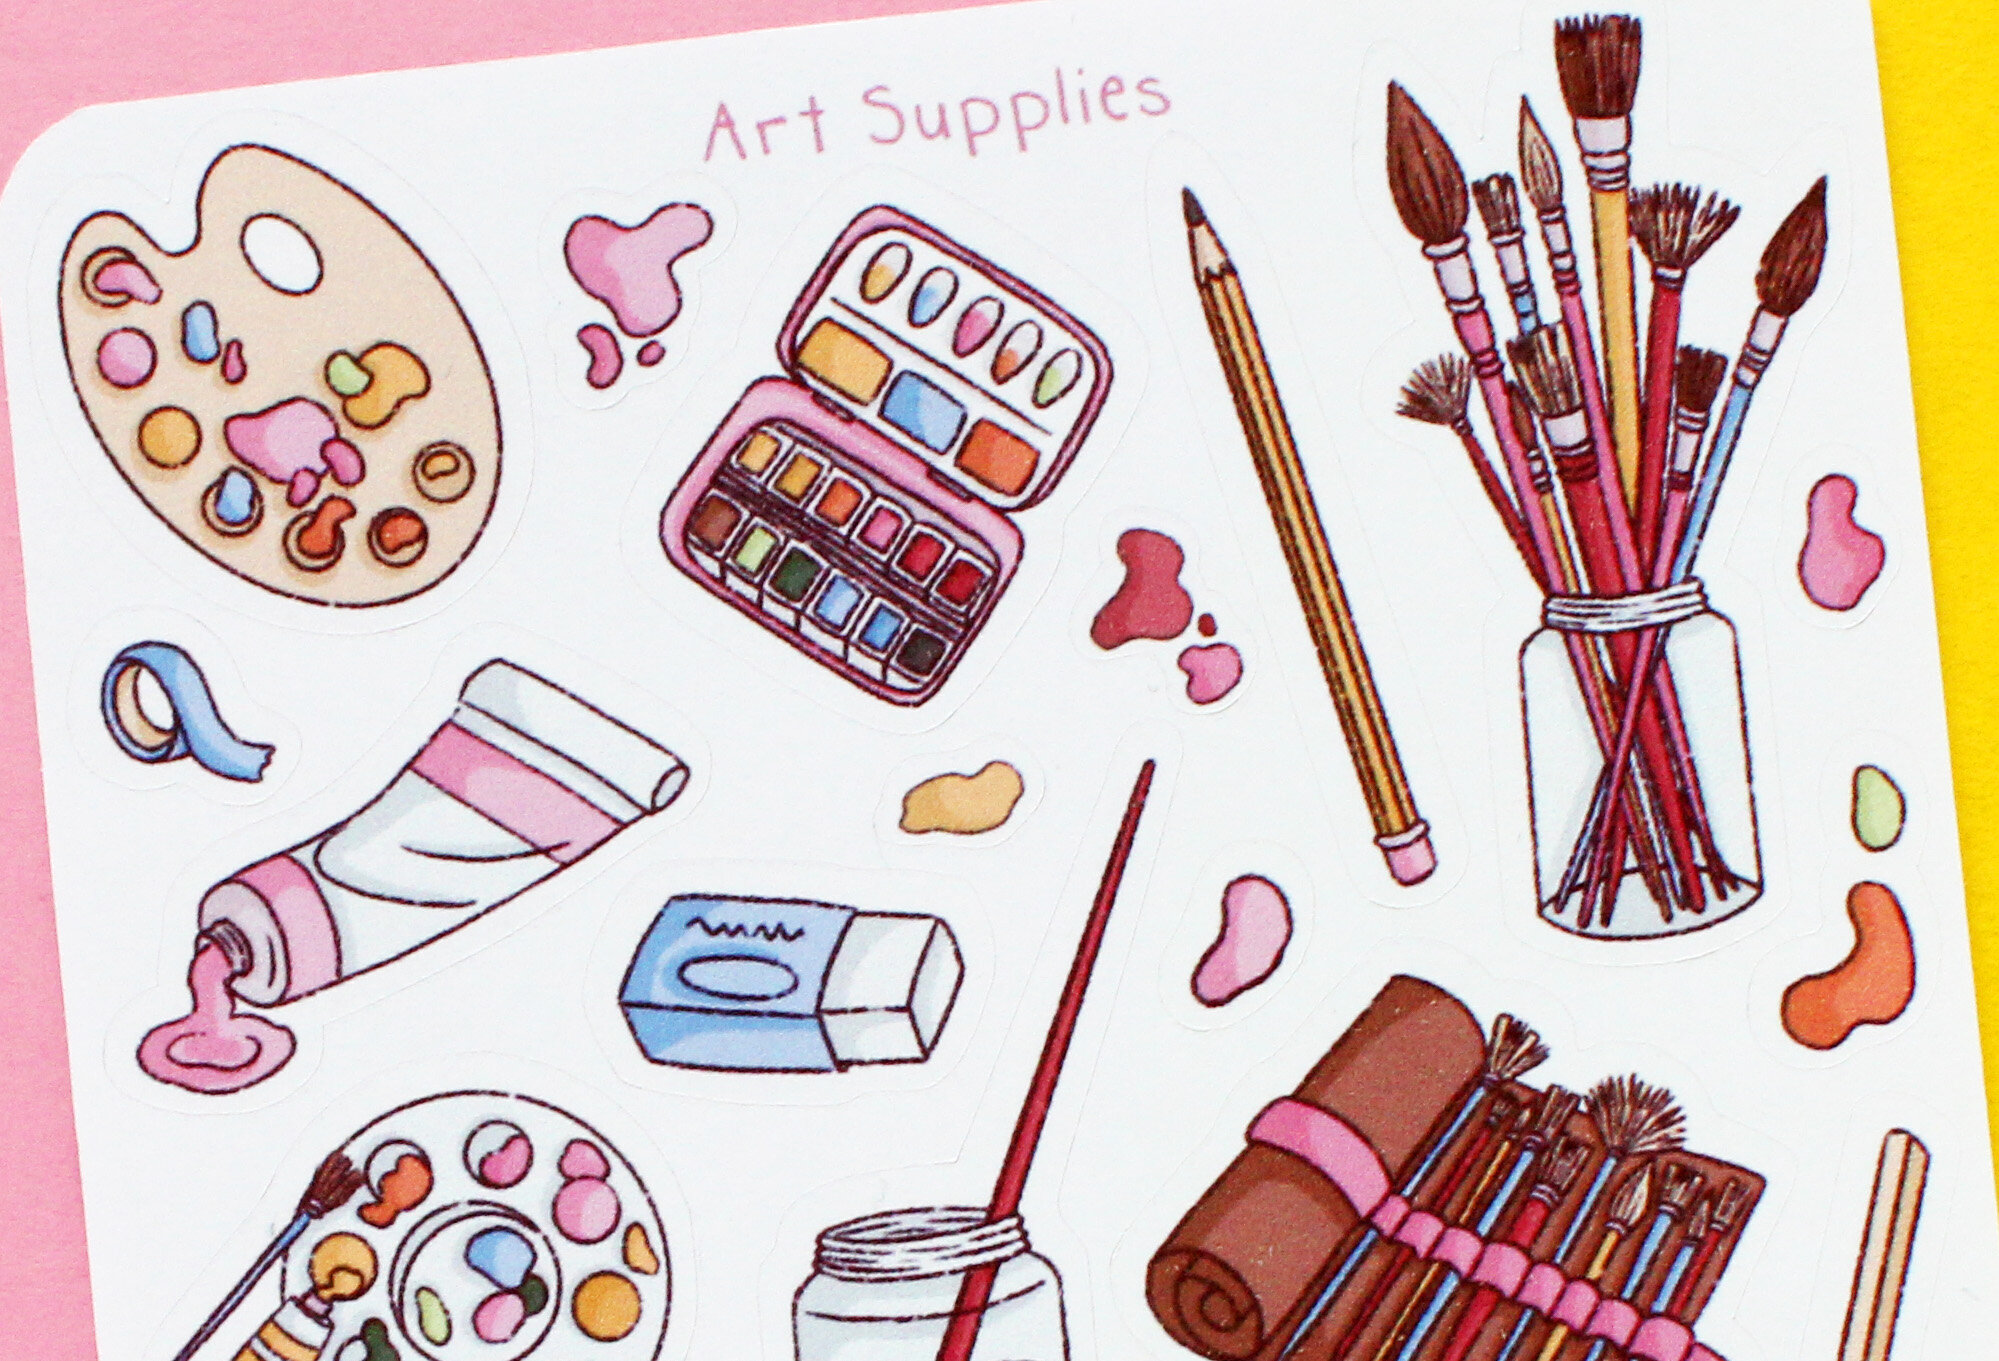 Drawing Supplies for Beginners! - The Graphics Fairy